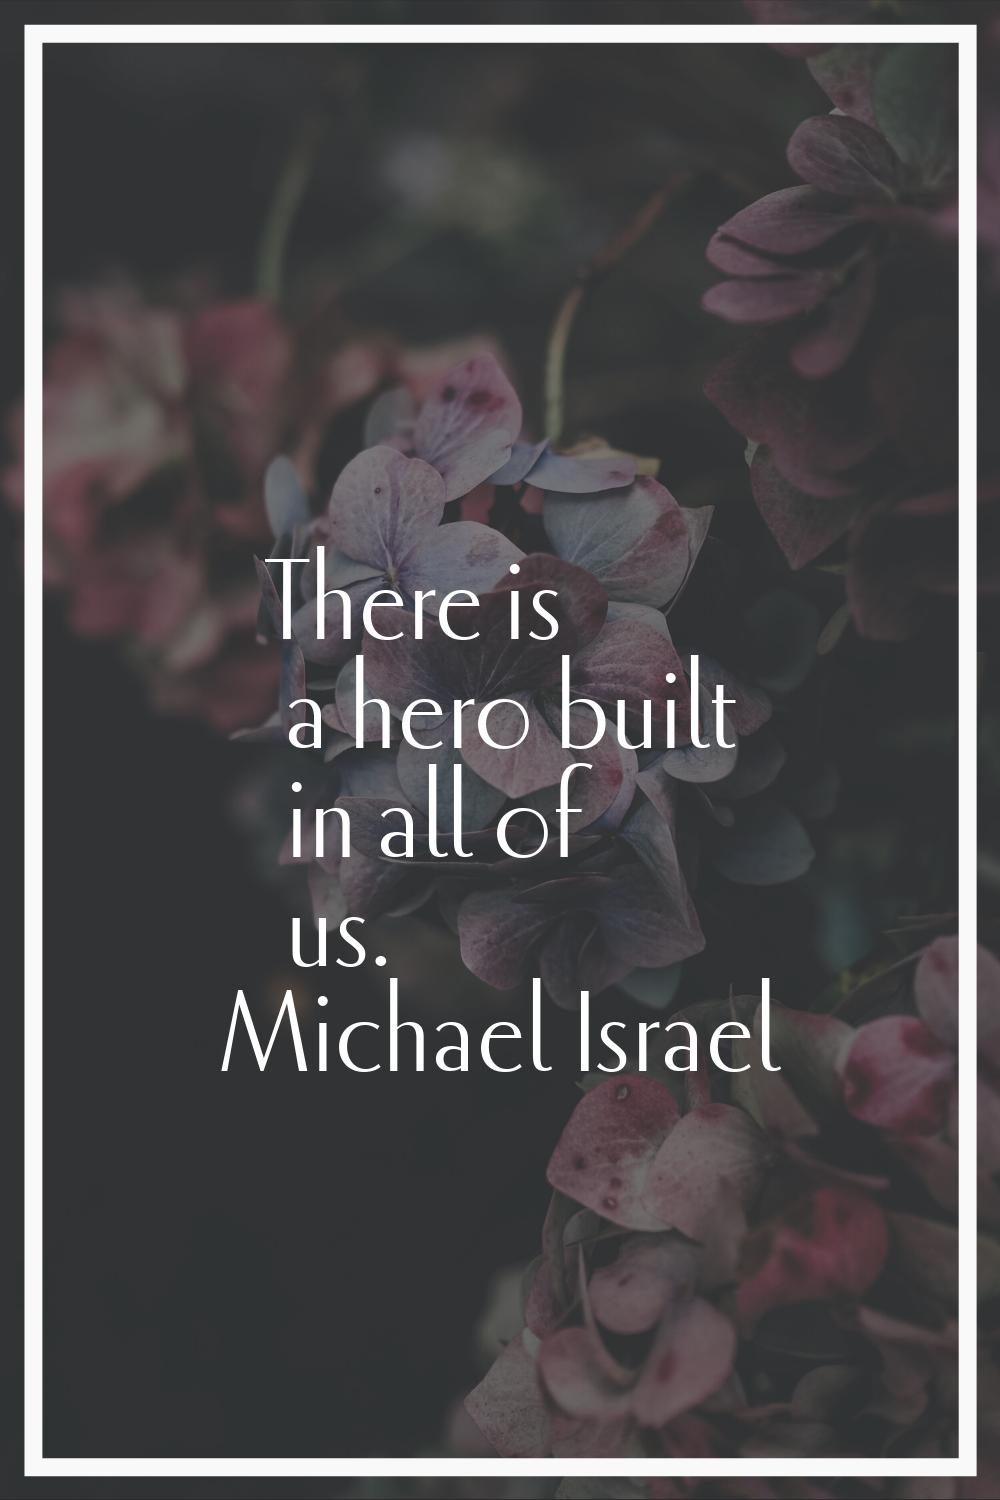 There is a hero built in all of us.